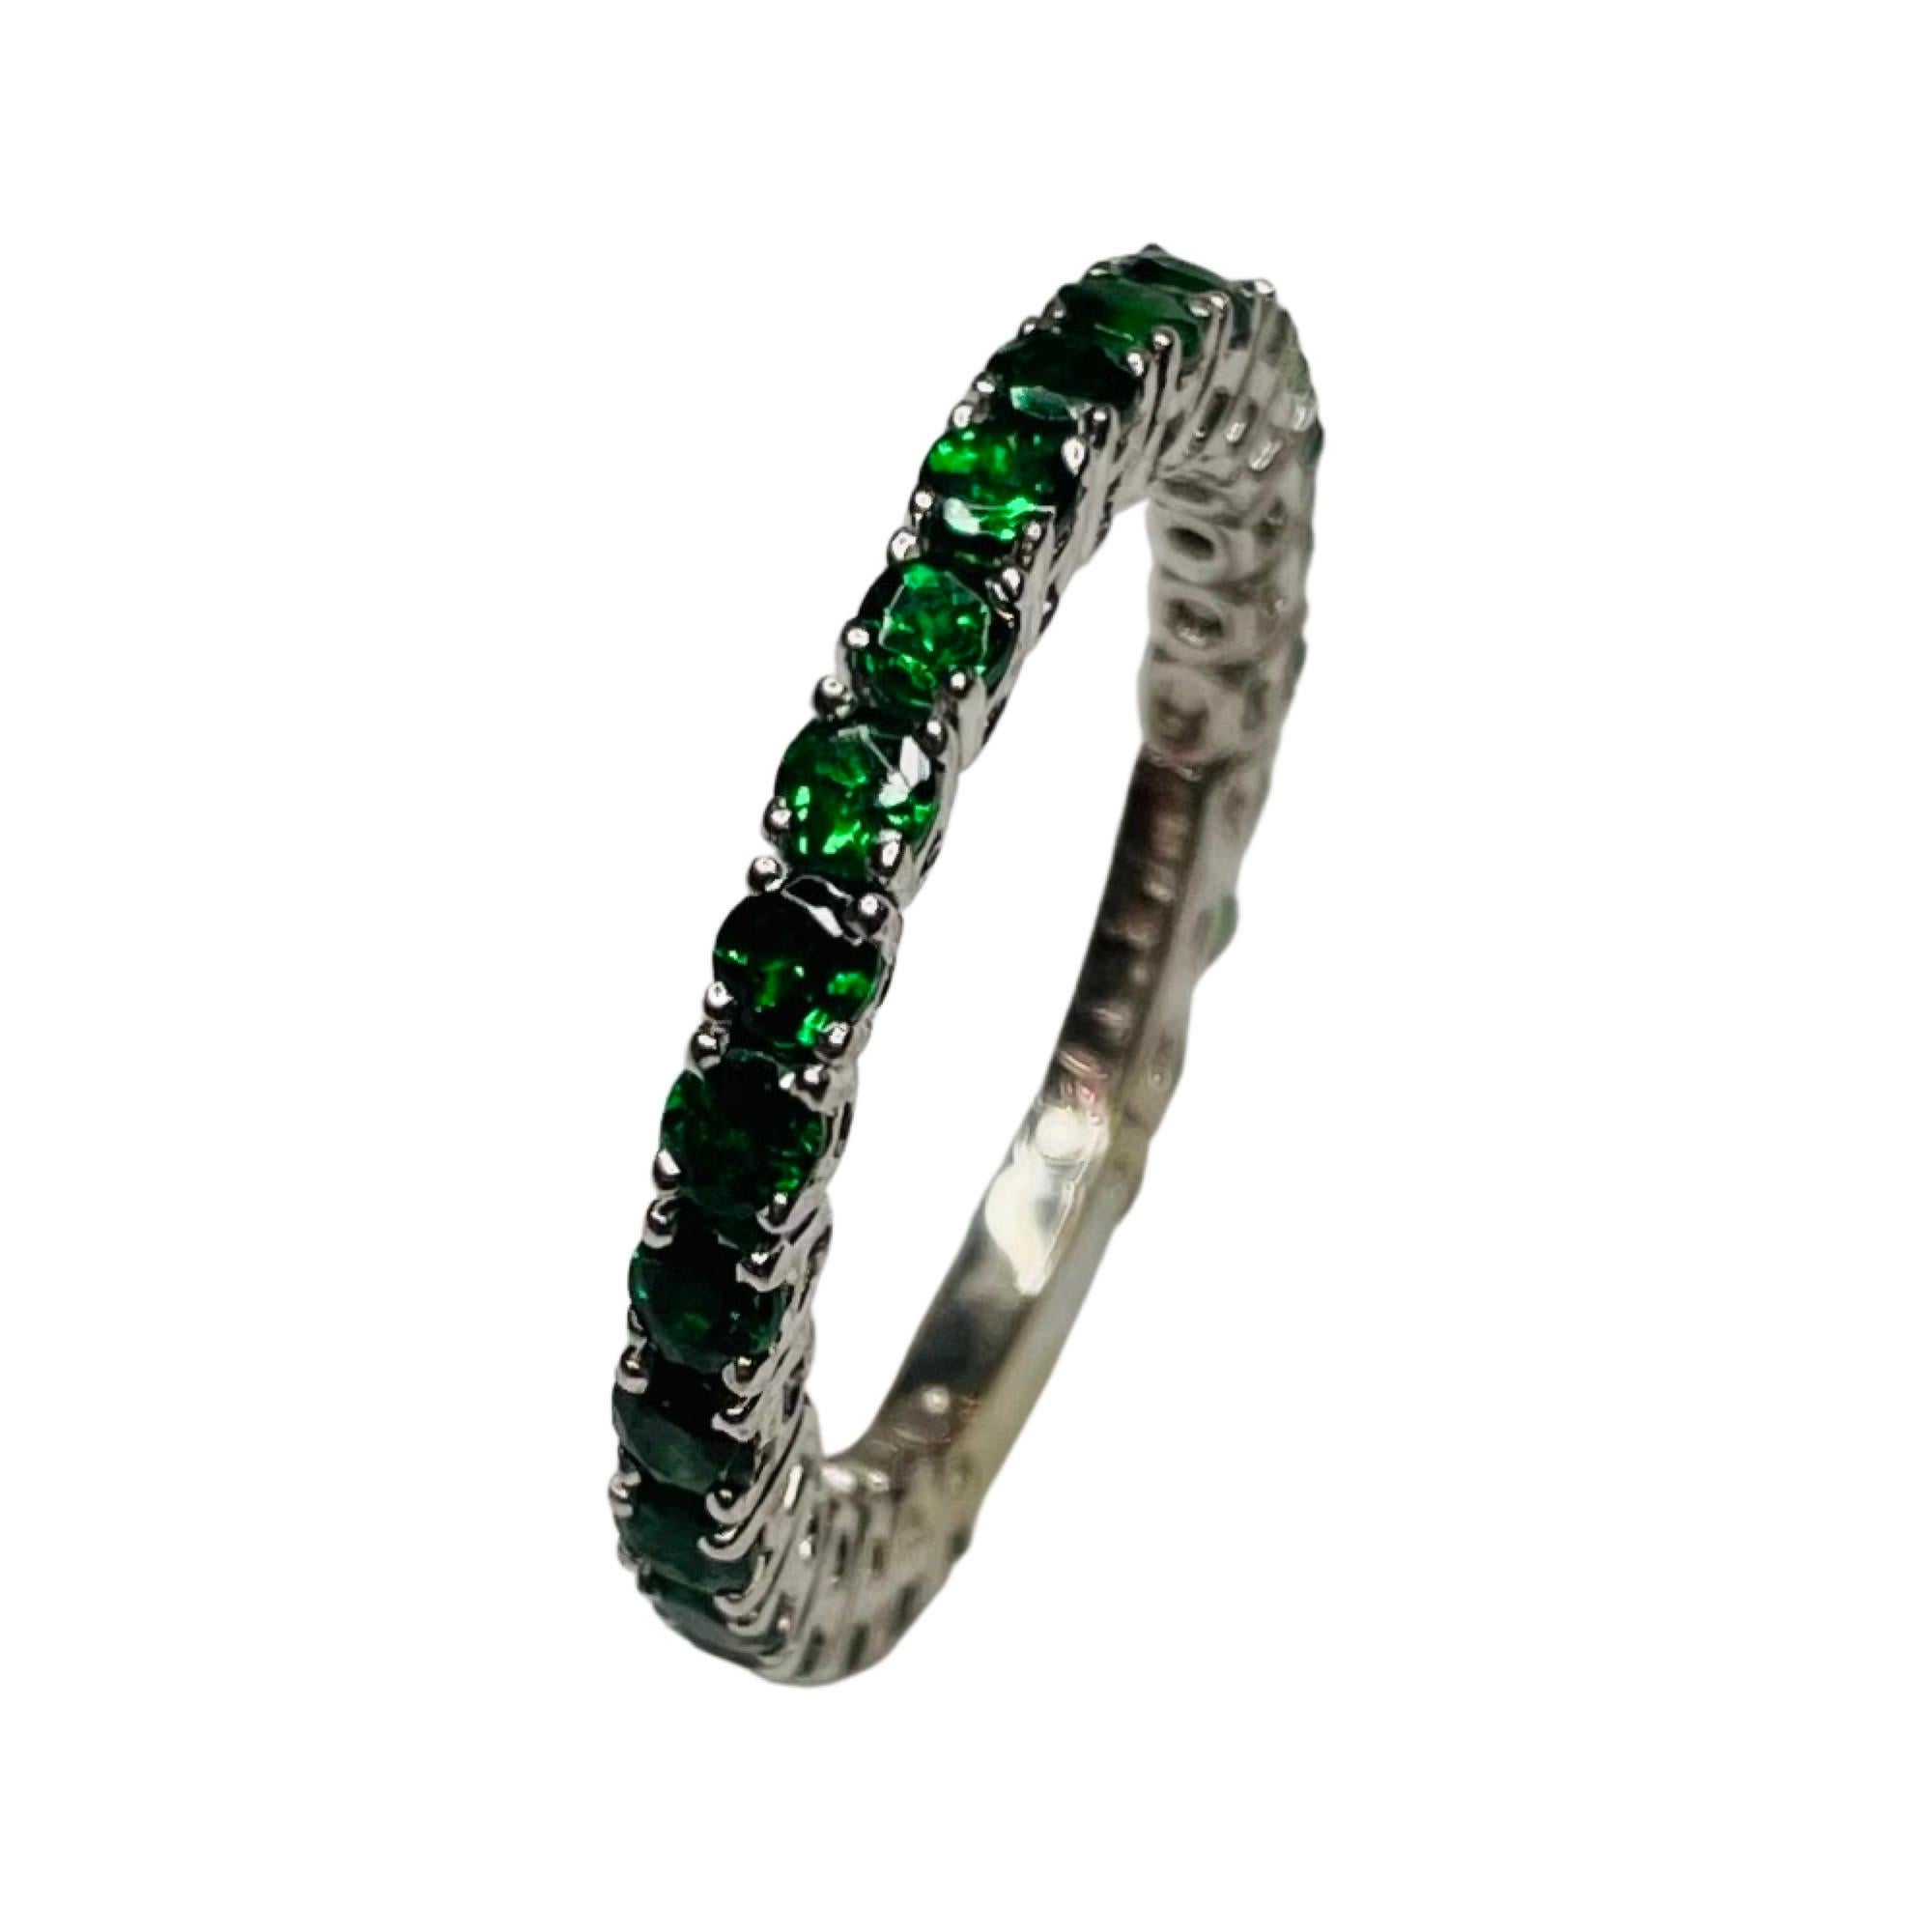 William Levine Fine Jewels 18K White Gold Natural Tsavorite Garnet Ring. There are 25, diamond cut Tsavorite Garnets weighing 1.54 carats. They are prong set. The ring is 2.2 mm wide. The ring is finger size 6.25 but can be sized for an additional